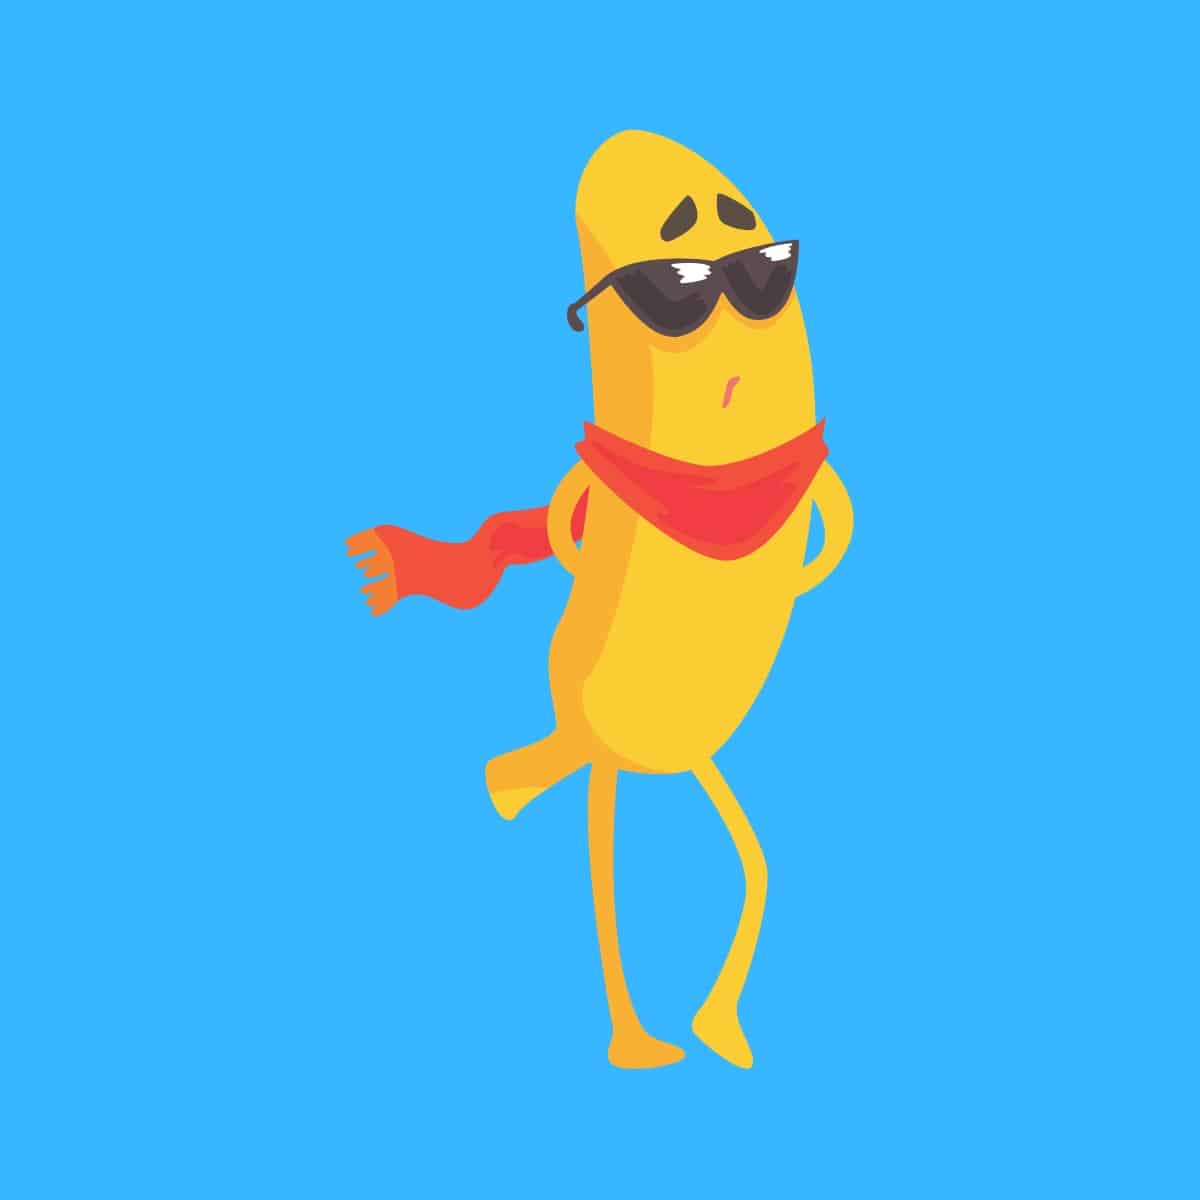 Cartoon graphic of a banana wearing sunglasses and a red scarf on a blue background.